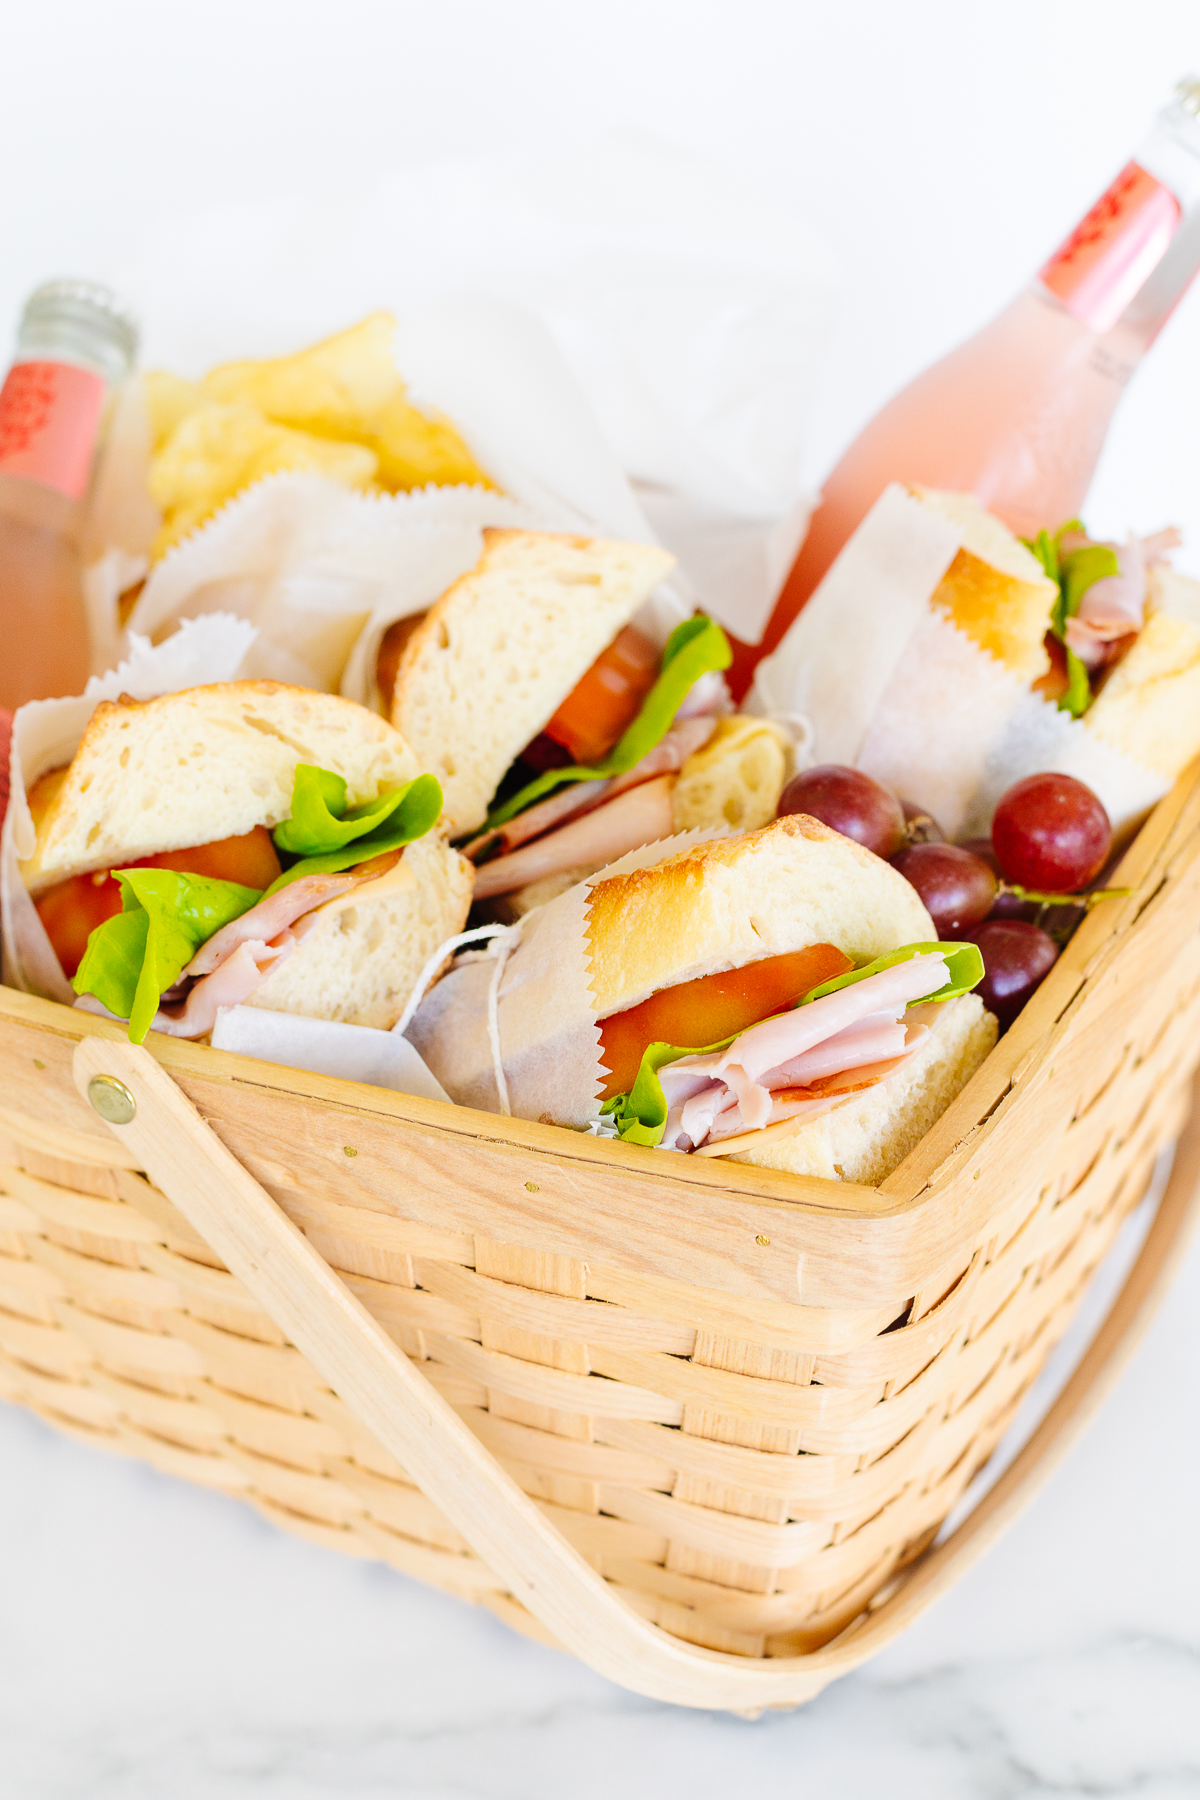 A picnic basket filled with sandwiches, chips, grapes, and a bottle of beverage.